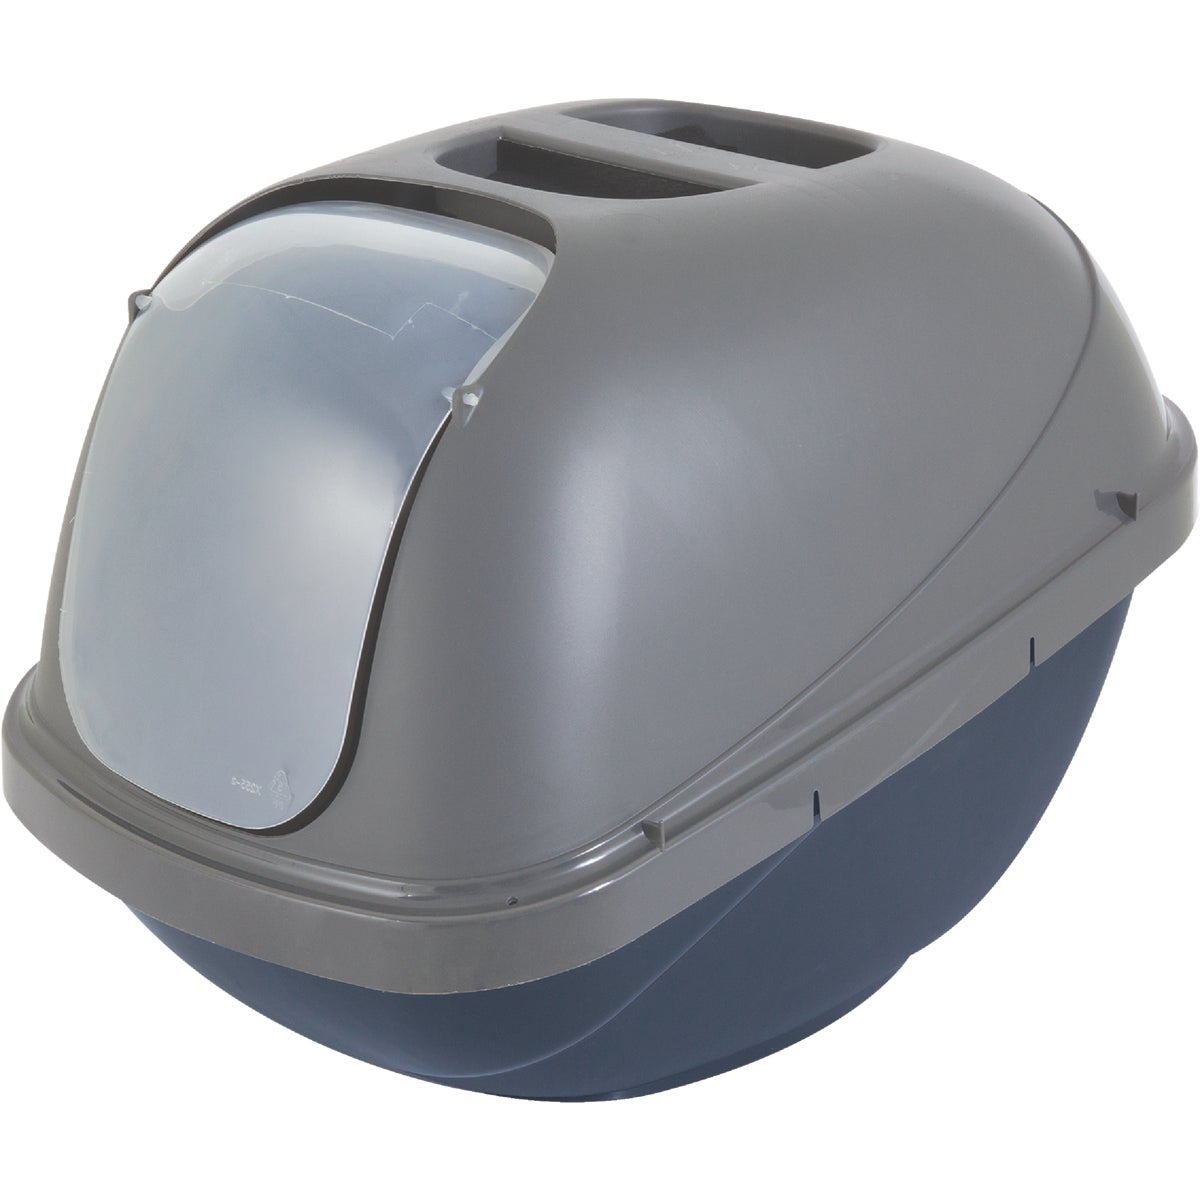 Item 818542, Covered litter pan with removable privacy door.